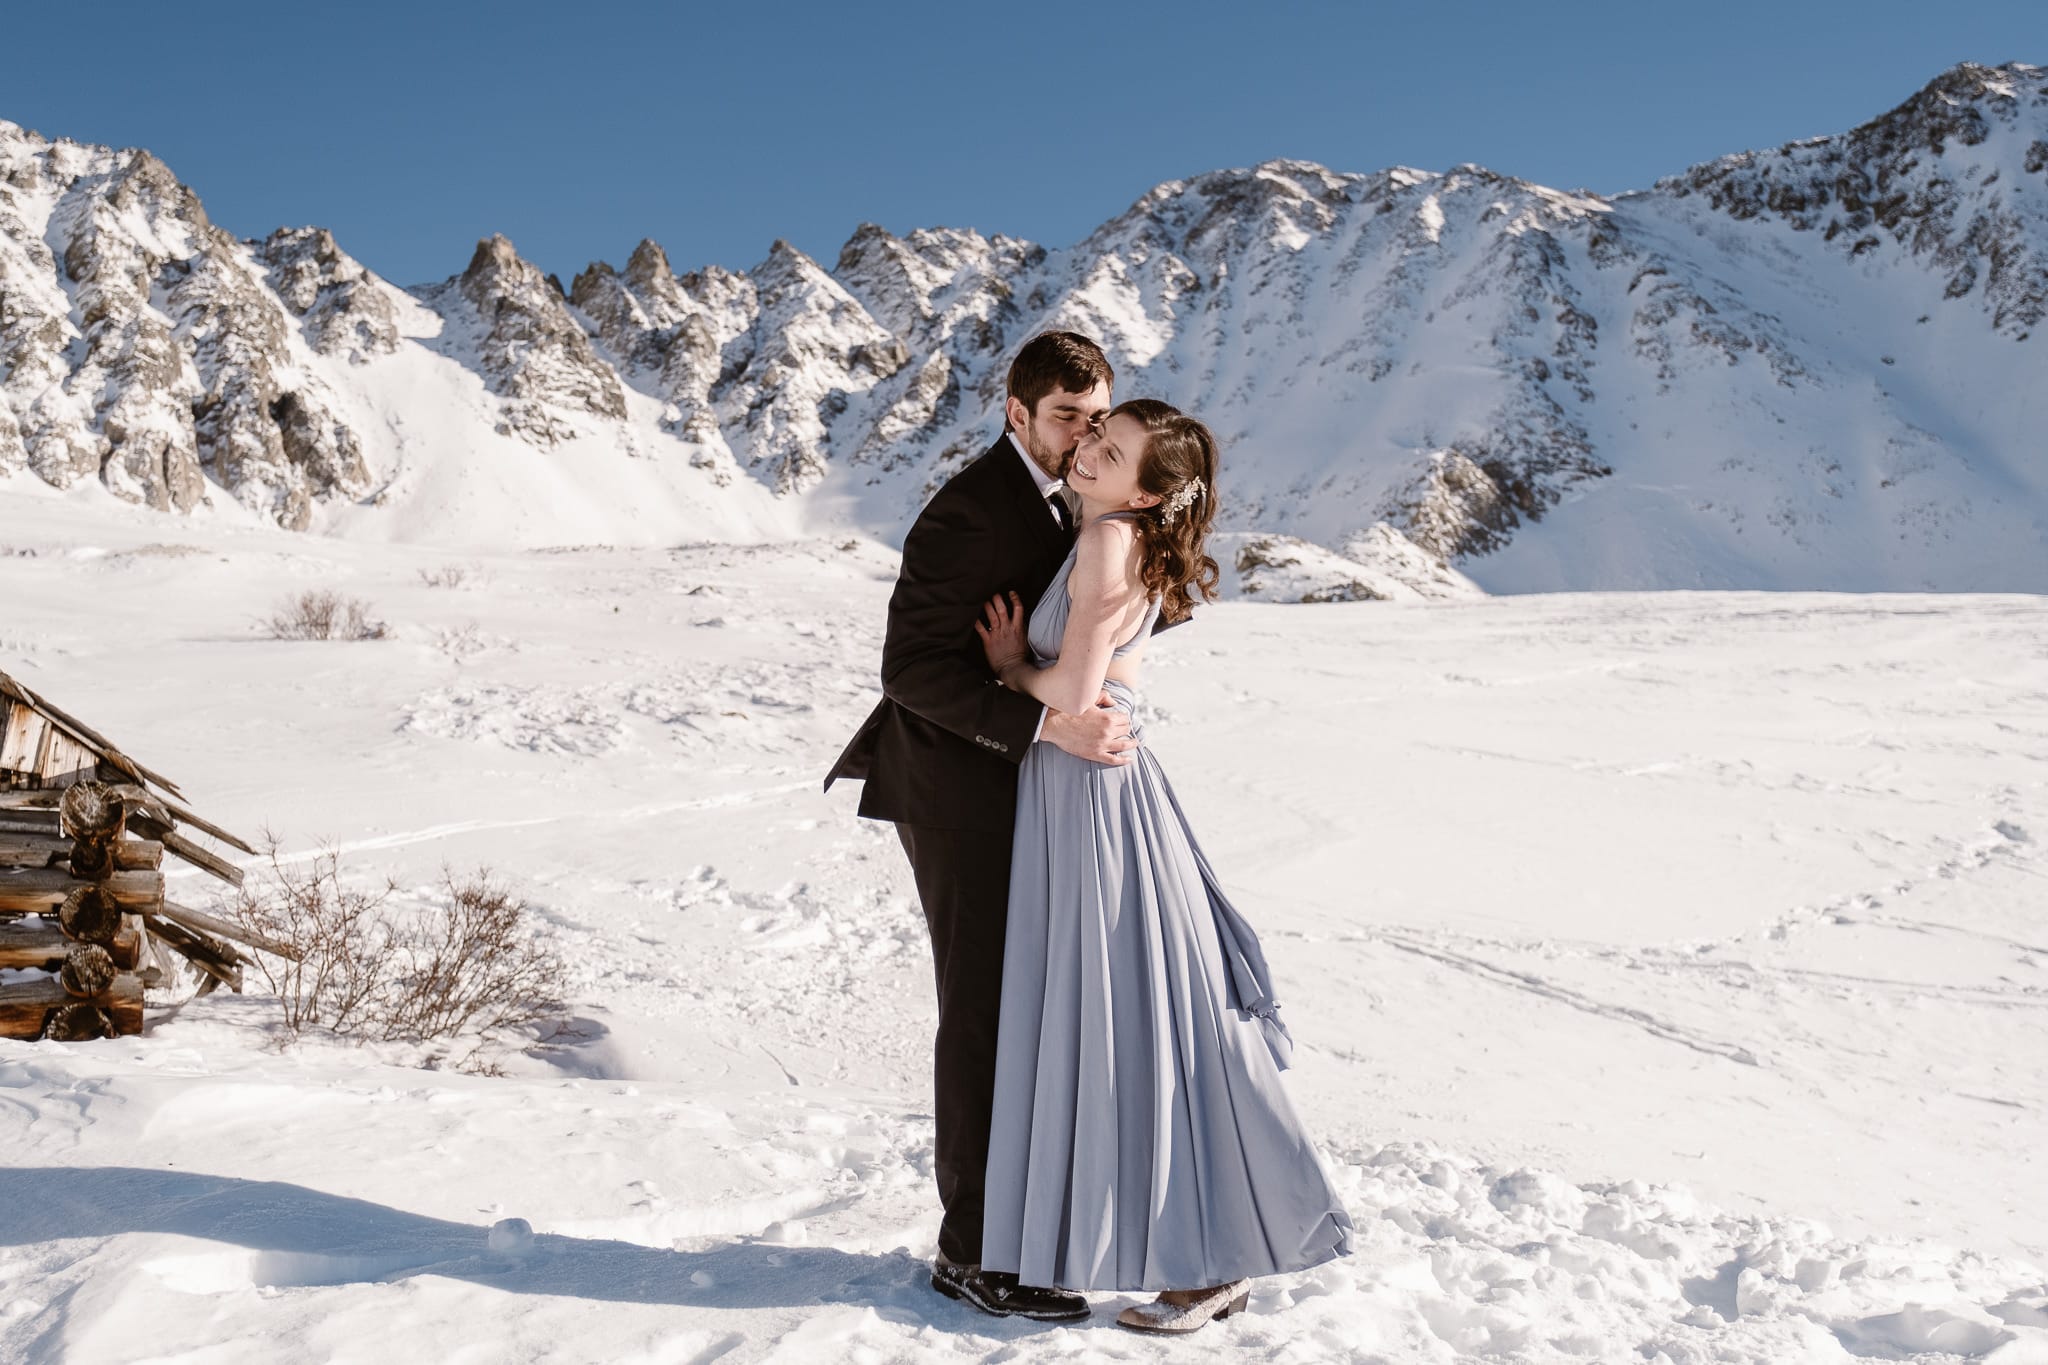 Backcountry skiing elopement in the snow-covered mountains of Colorado, bride wearing light blue wedding dress with open back